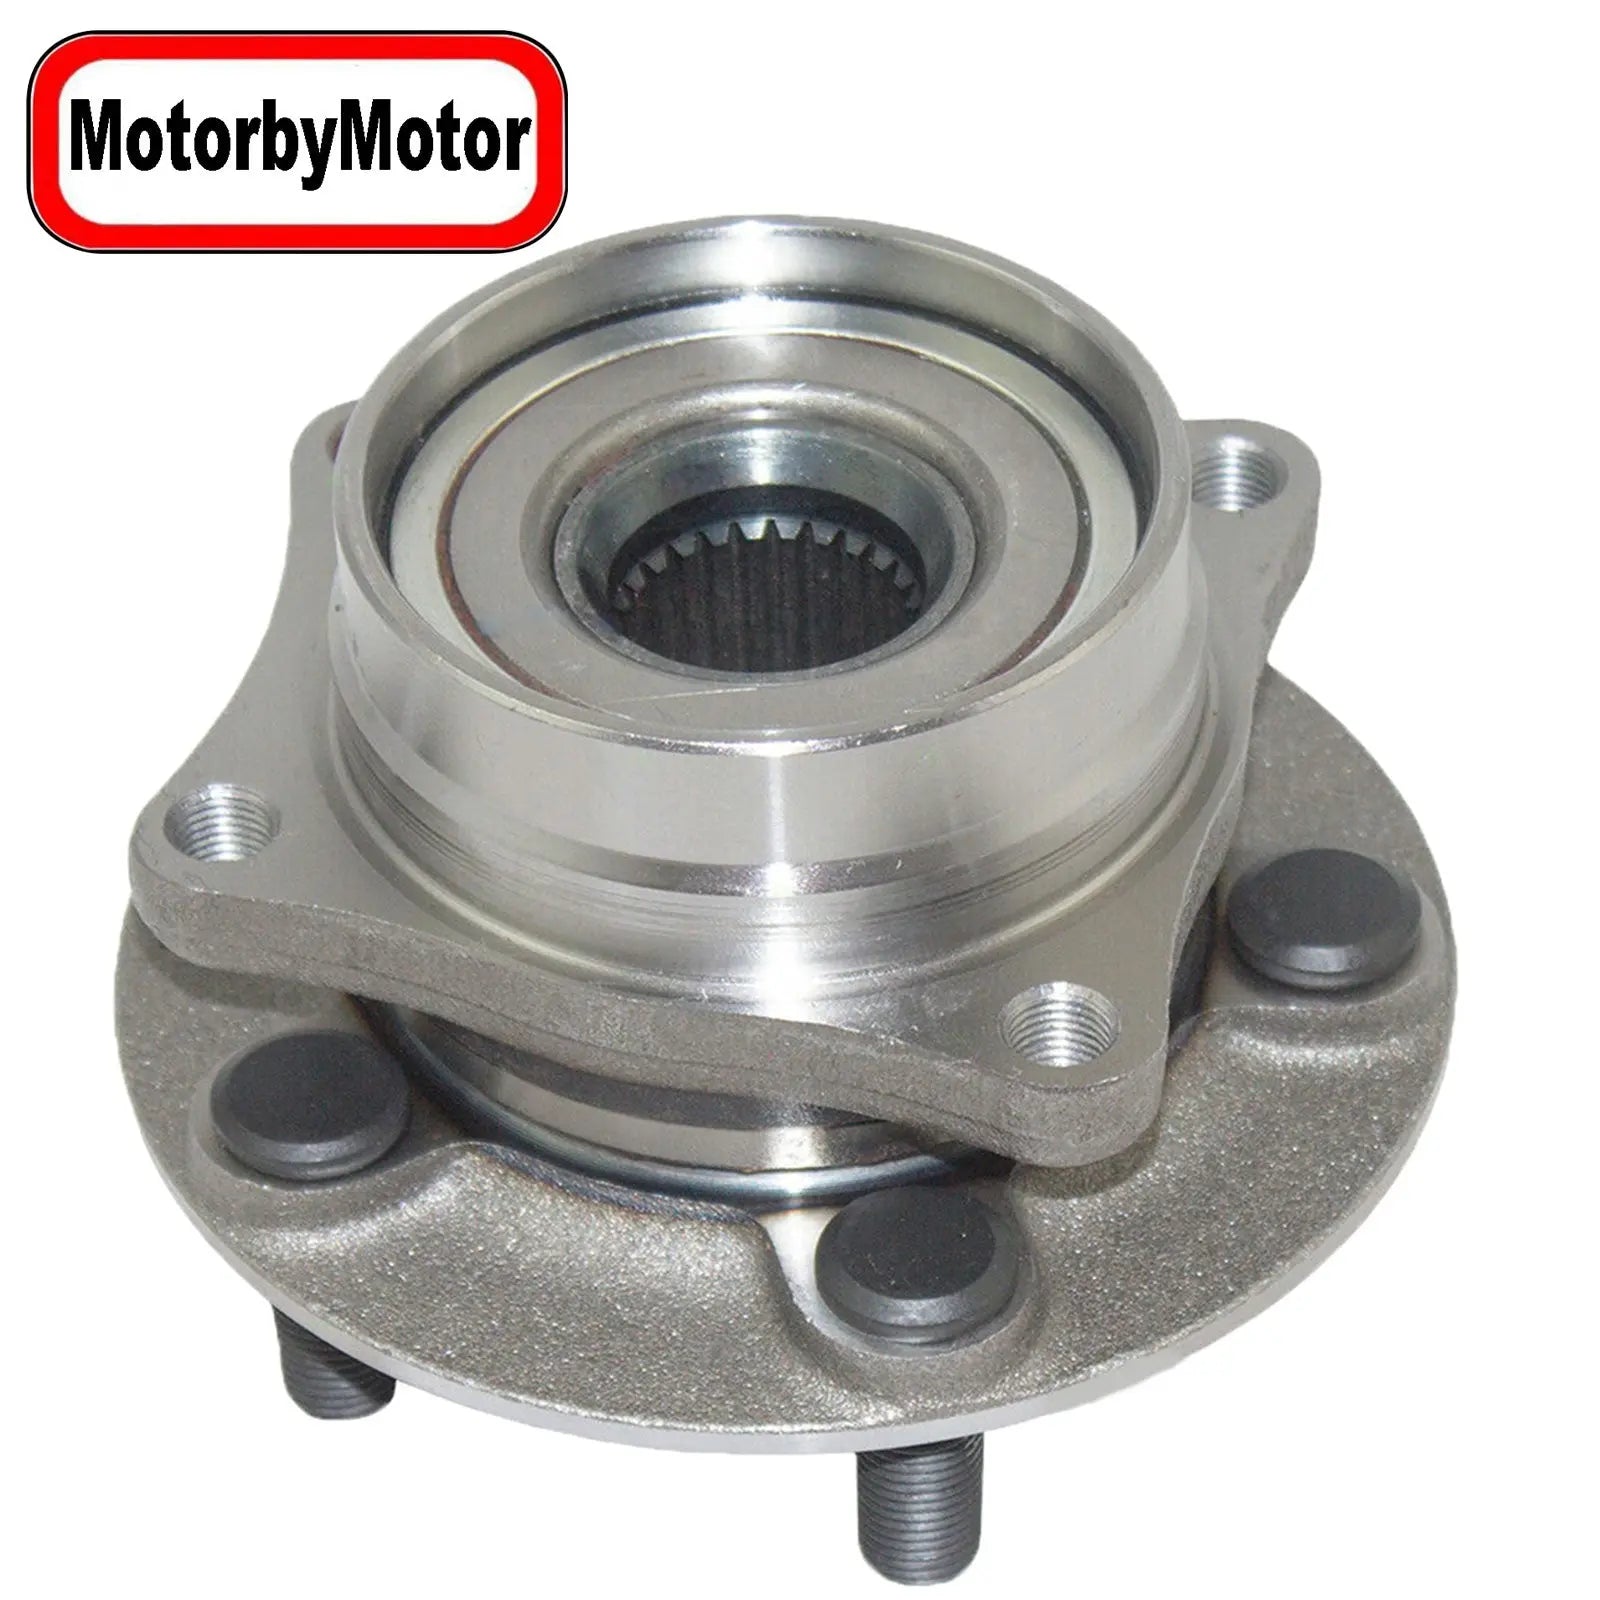 MotorbyMotor 513265 Front Wheel Bearing and Hub Assembly with 5 Lugs fits for Toyota Prius Low-Runout OE Directly Replacement Hub Bearing MotorbyMotor